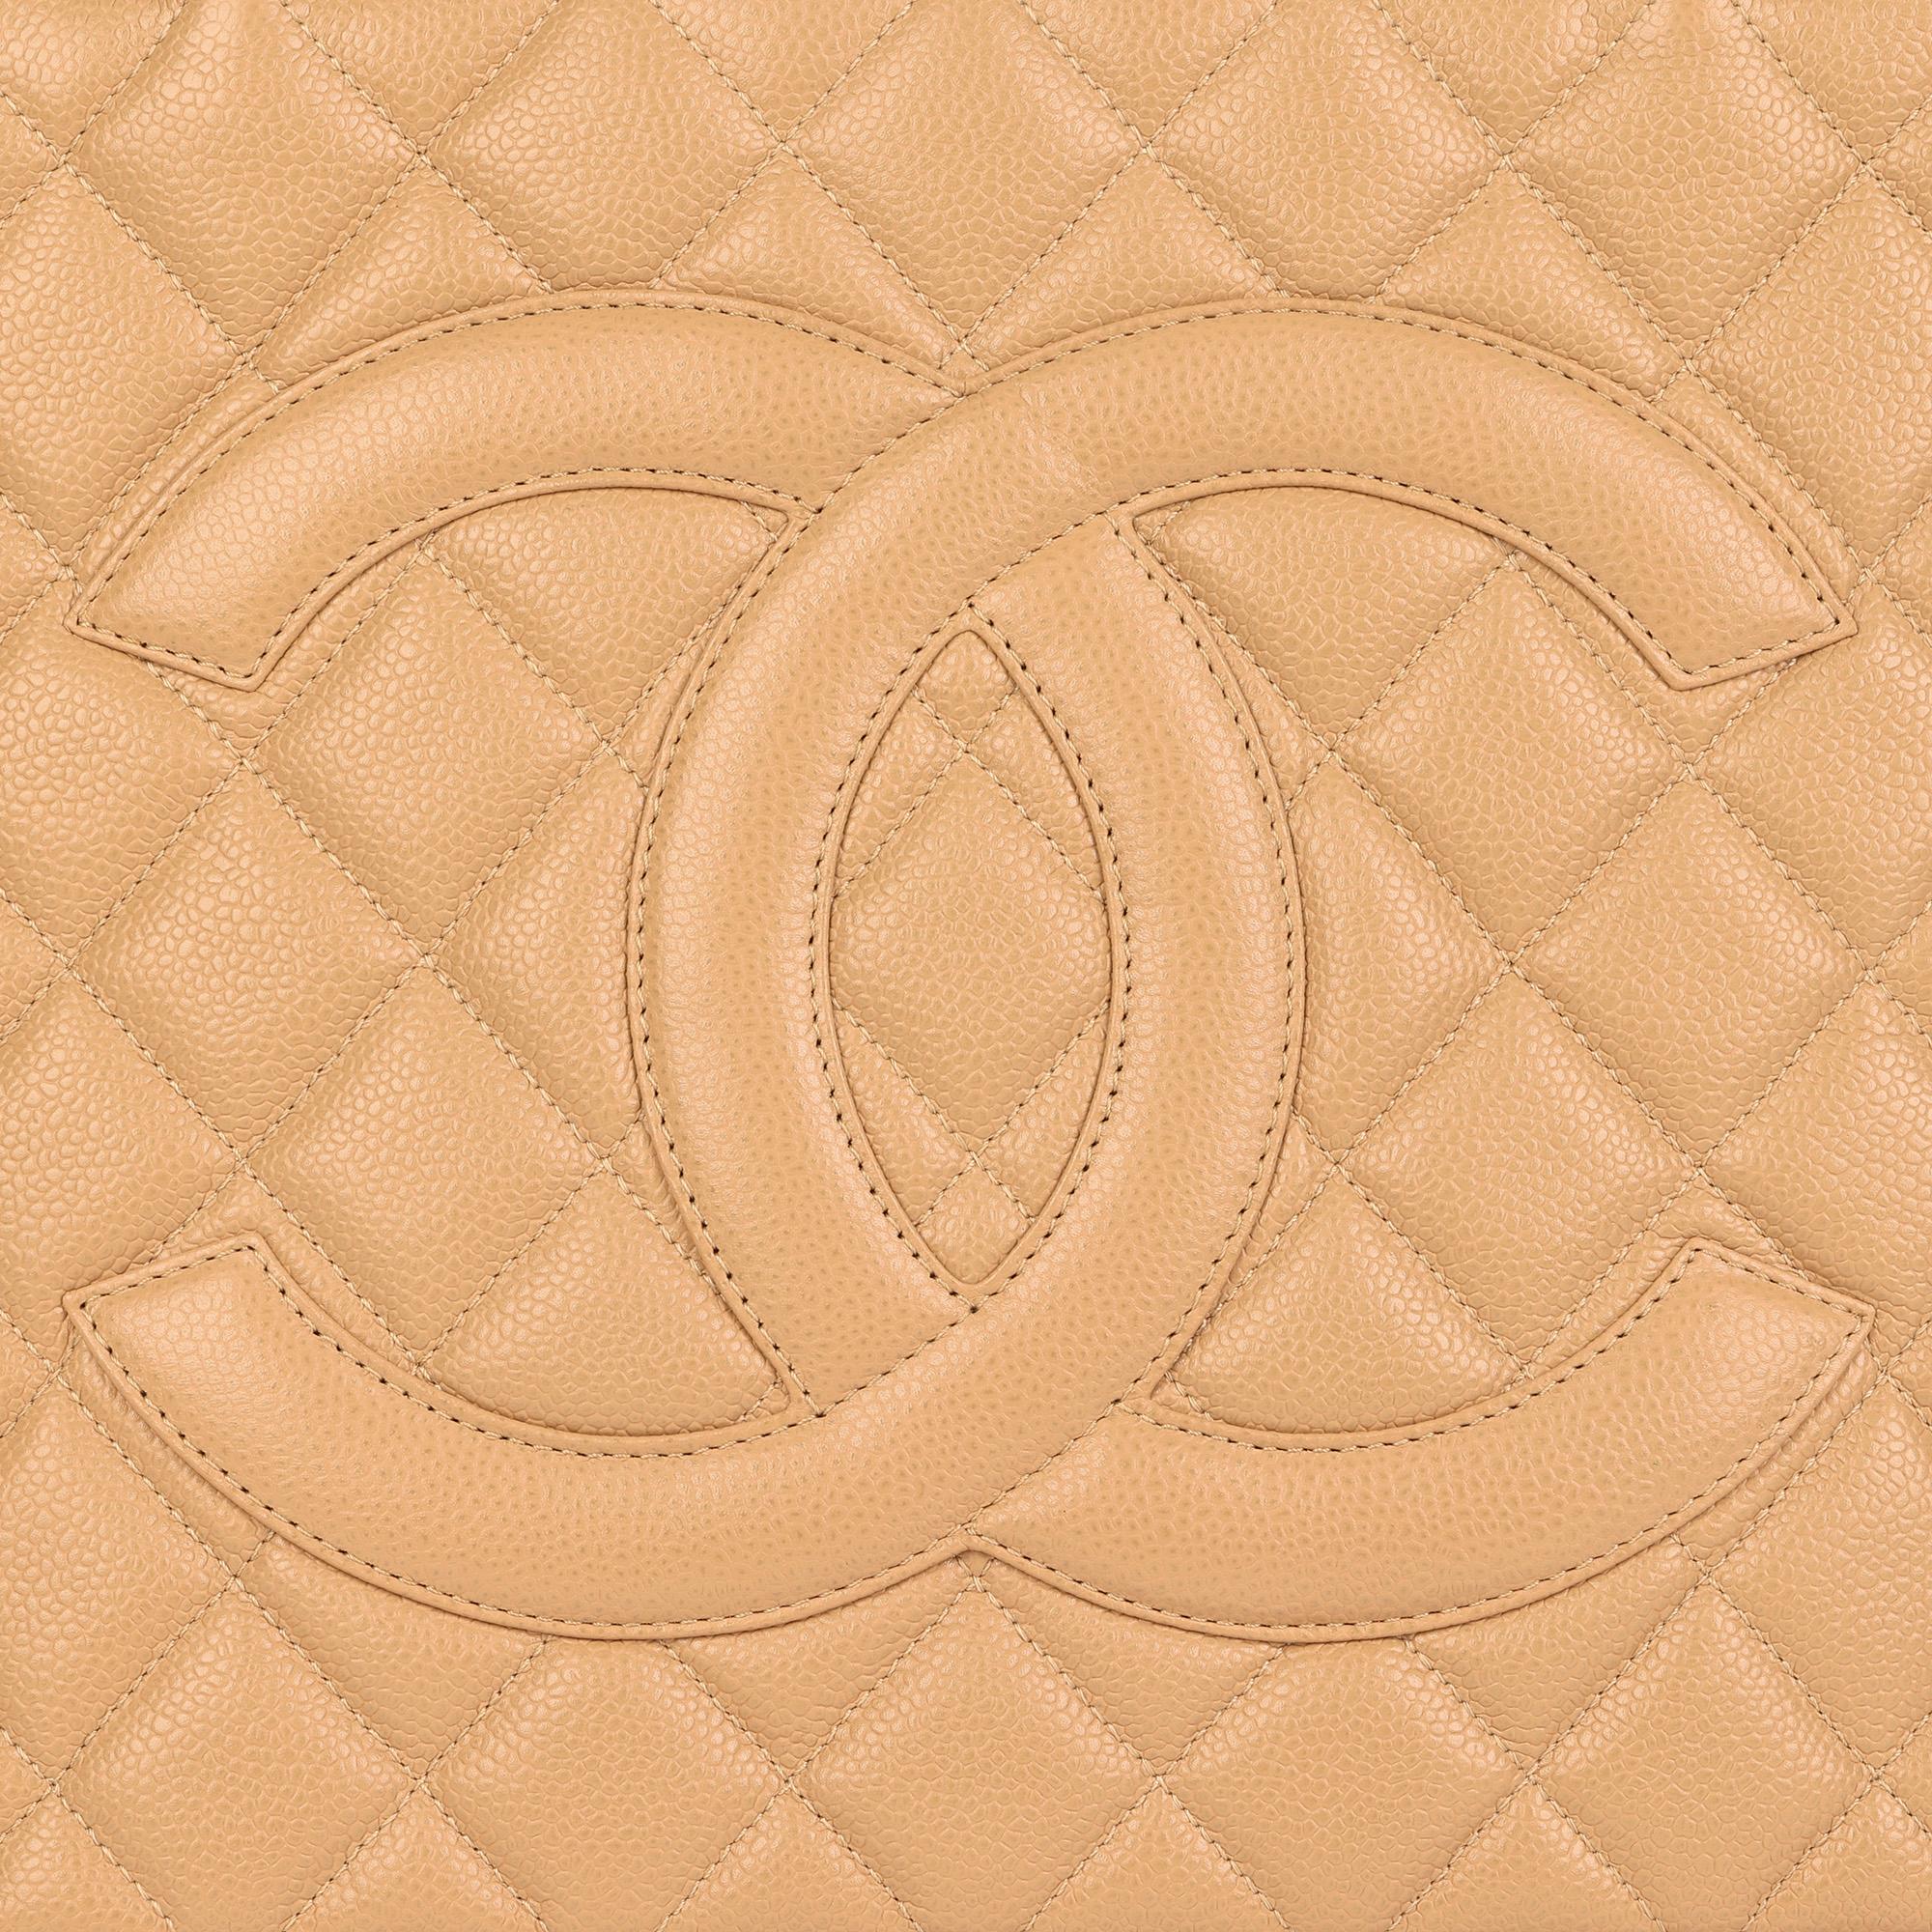 CHANEL
Beige Quilted Caviar Leather Medallion Tote

Xupes Reference: HB4074
Serial Number: 8307430
Age (Circa): 2004
Accompanied By: Authenticity Card, Care Booklet
Authenticity Details: Authenticity Card, Serial Sticker (Made in Italy)
Gender: